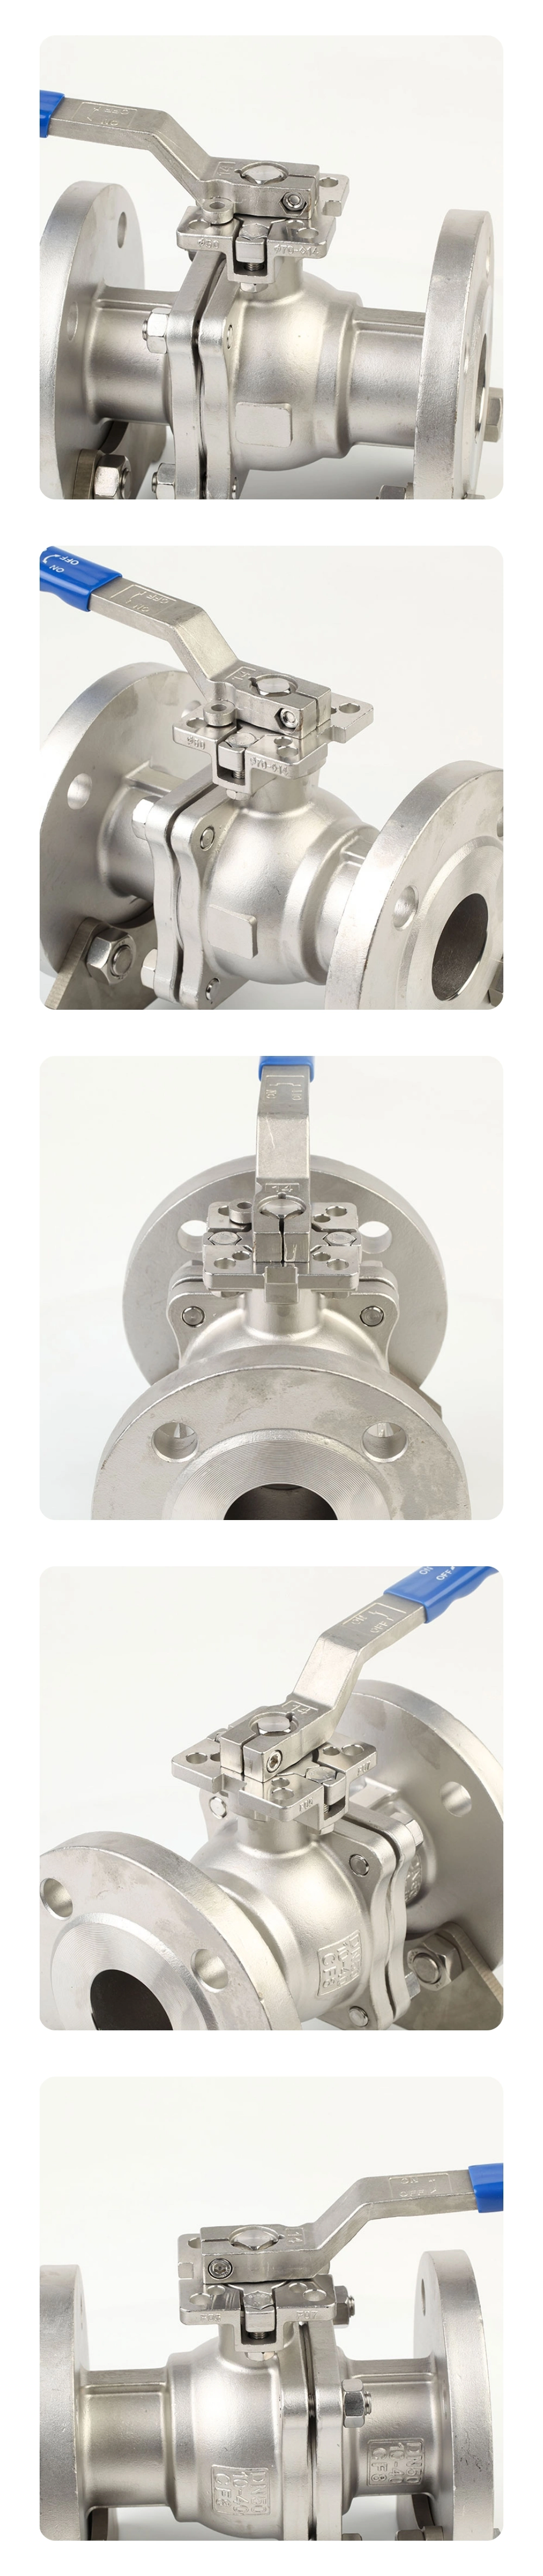 Manufacture ANSI/2PC Flange Stainless Steel Ball Valve with Handle Lever